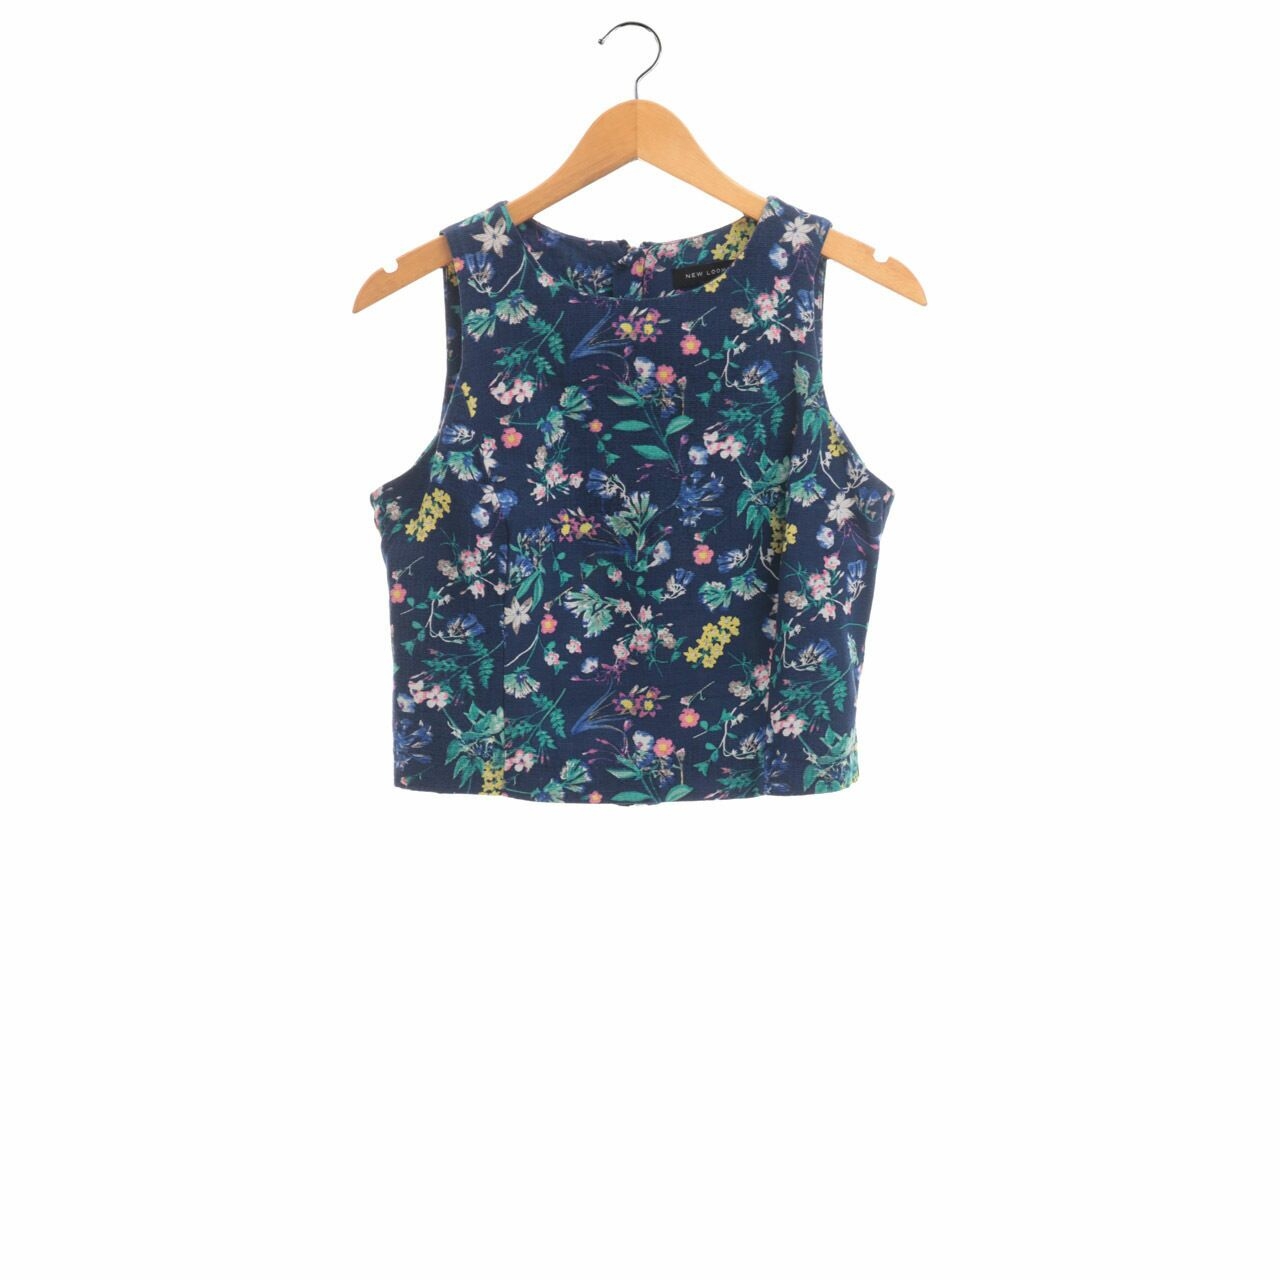 New Look Blue Floral Sleeveless